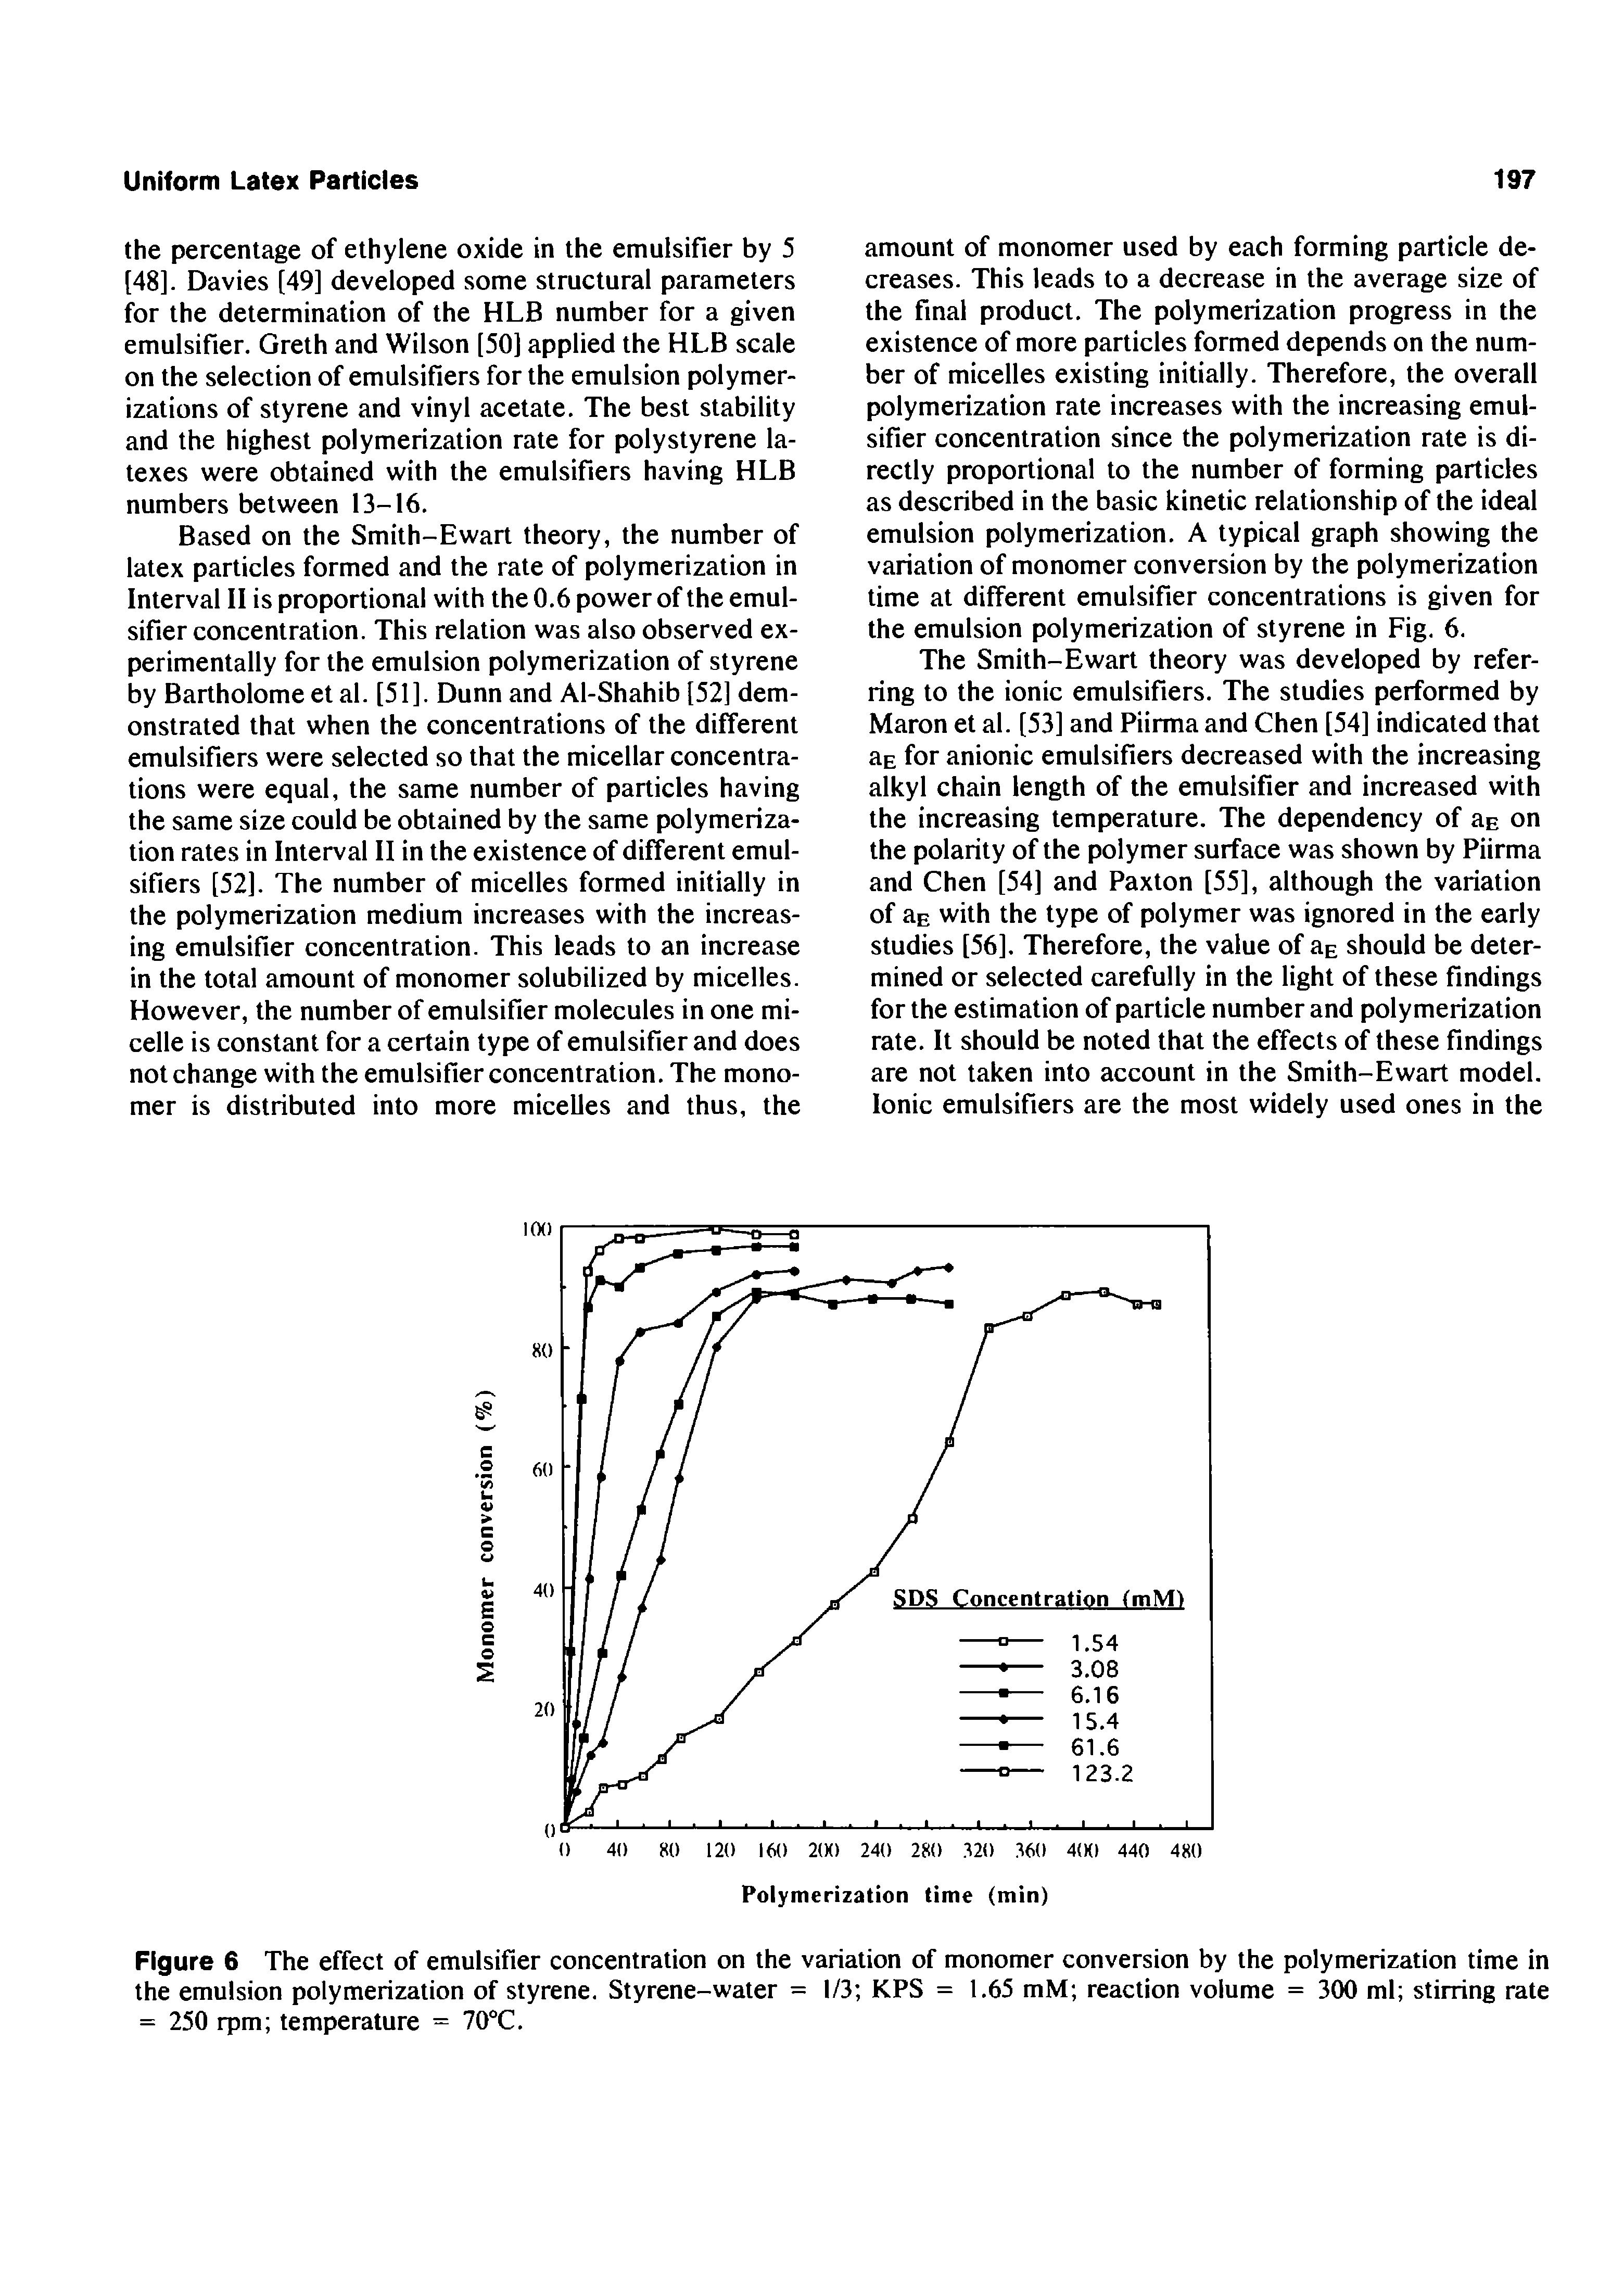 Figure 6 The effect of emulsifier concentration on the variation of monomer conversion by the polymerization time in the emulsion polymerization of styrene. Styrene-water = 1/3 KPS = 1,65 mM reaction volume = 300 ml stirring rate = 250 rpm temperature = 70 C,...